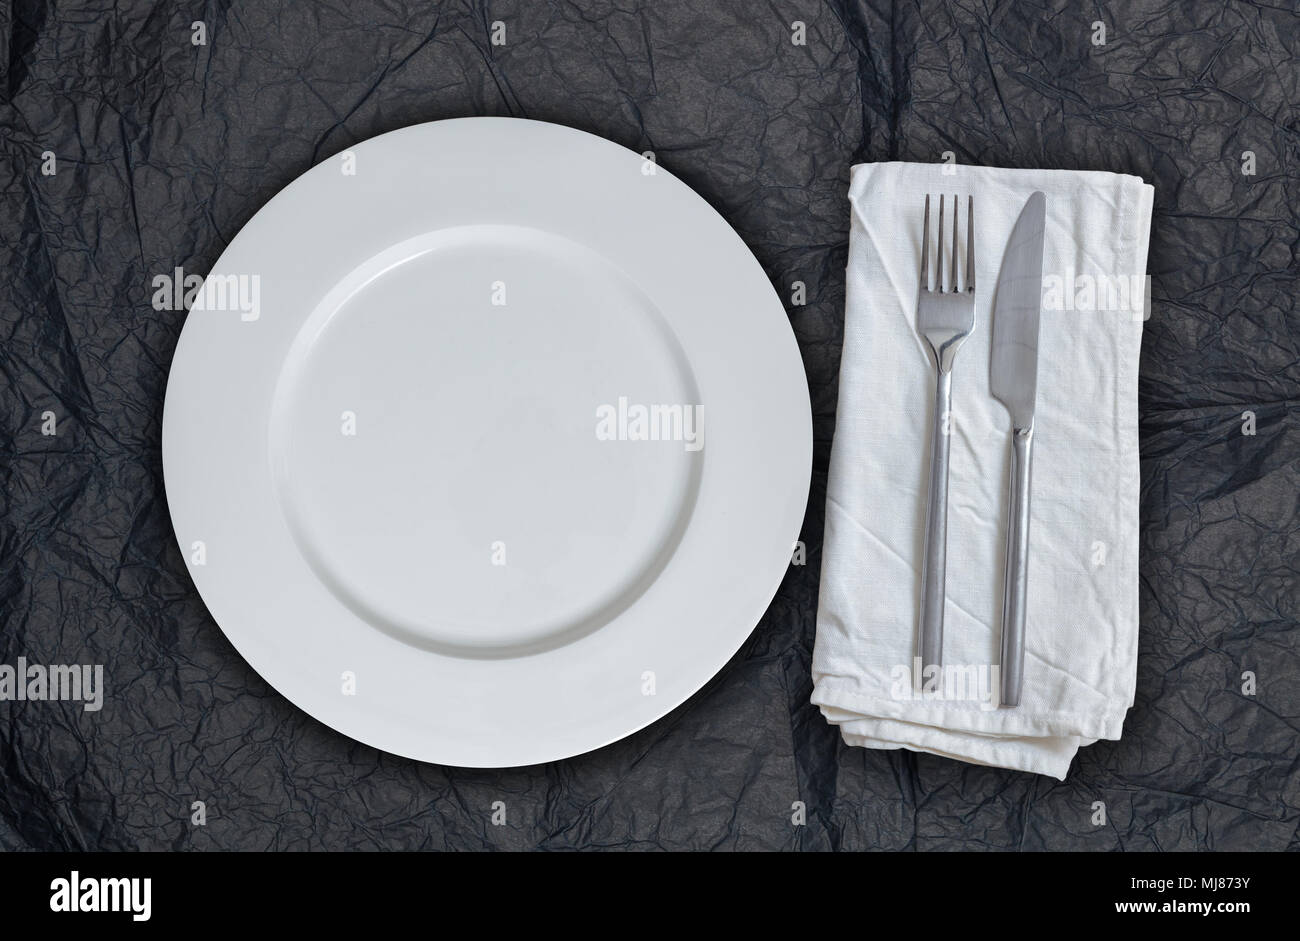 Empty plate and cutlery on black tissue paper. Stock Photo